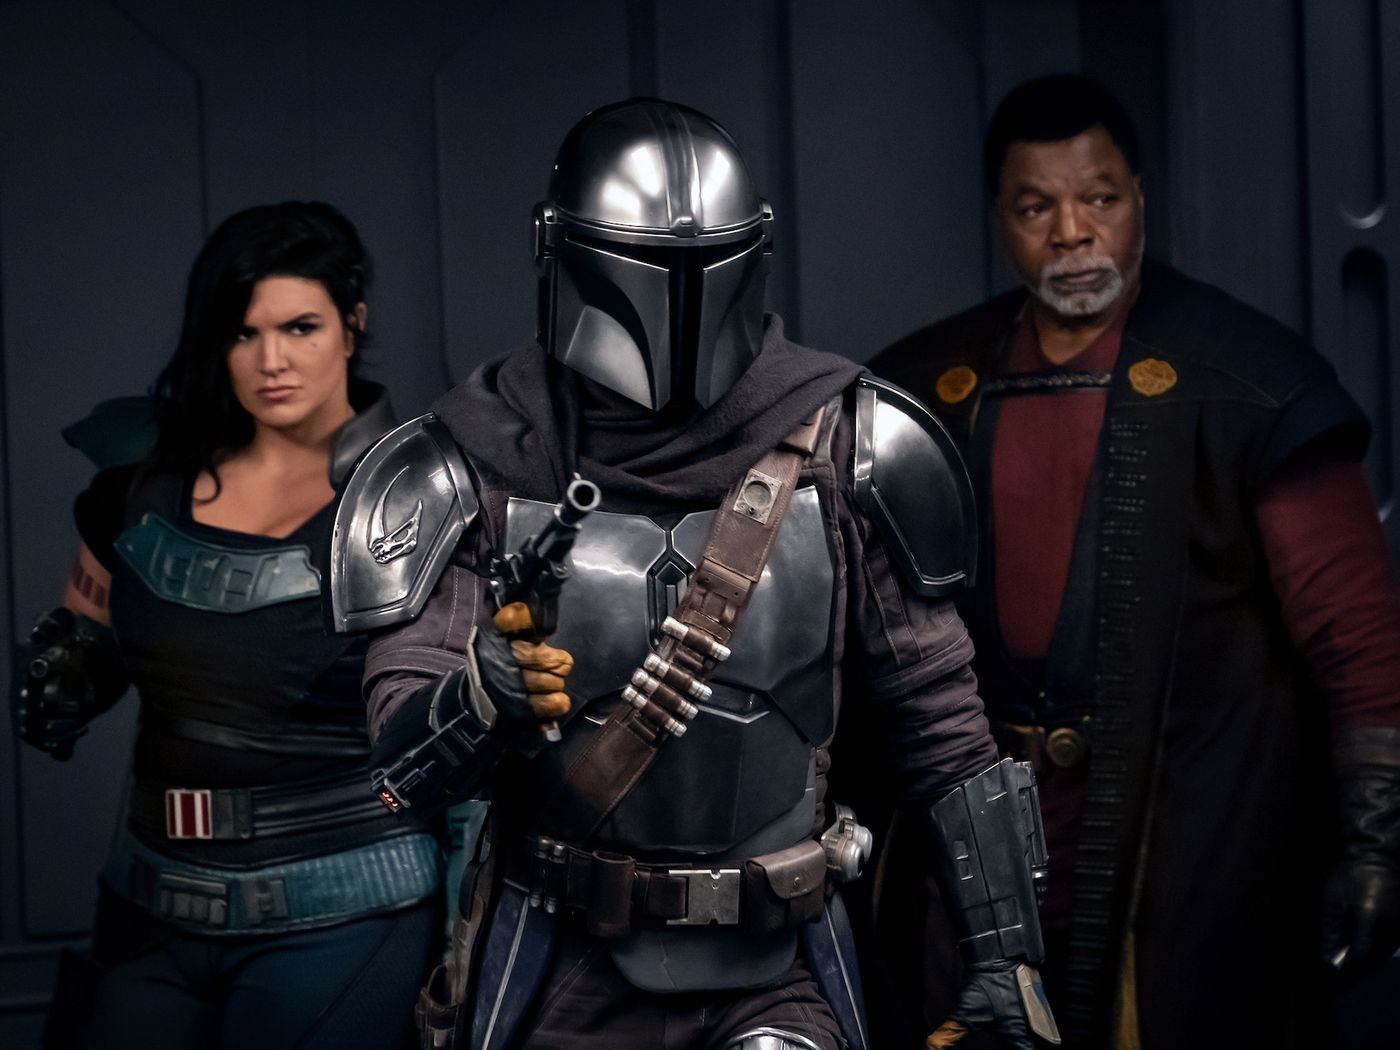 Star Wars Series The Mandalorian Fans Noted the 2021 Emmys Used Major Spoiler in Best Drama Awards Video!